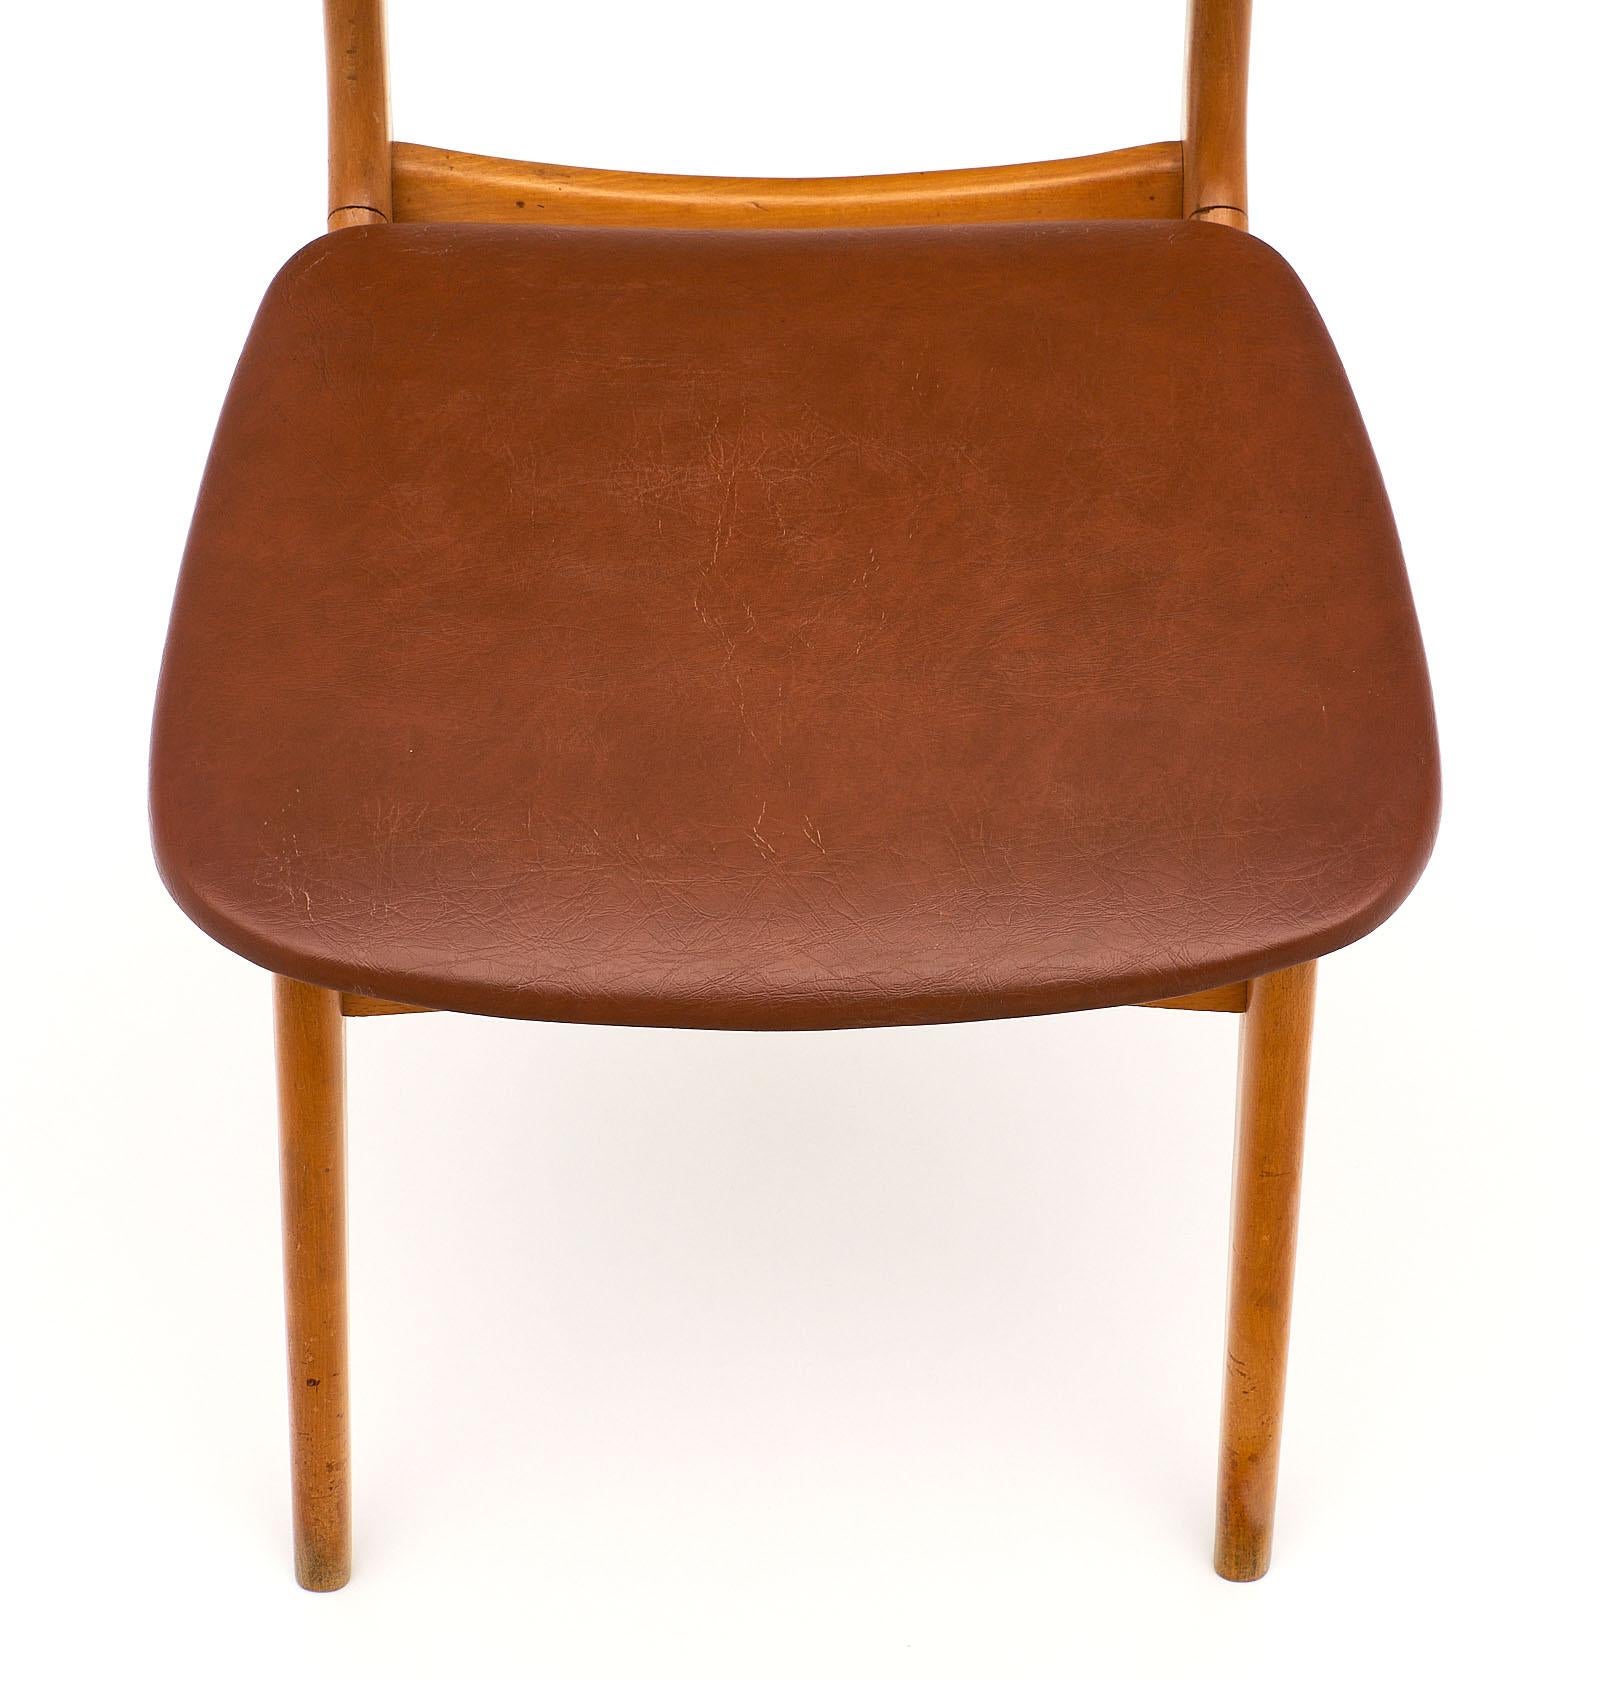 Mid-20th Century French Cherrywood Midcentury Chairs